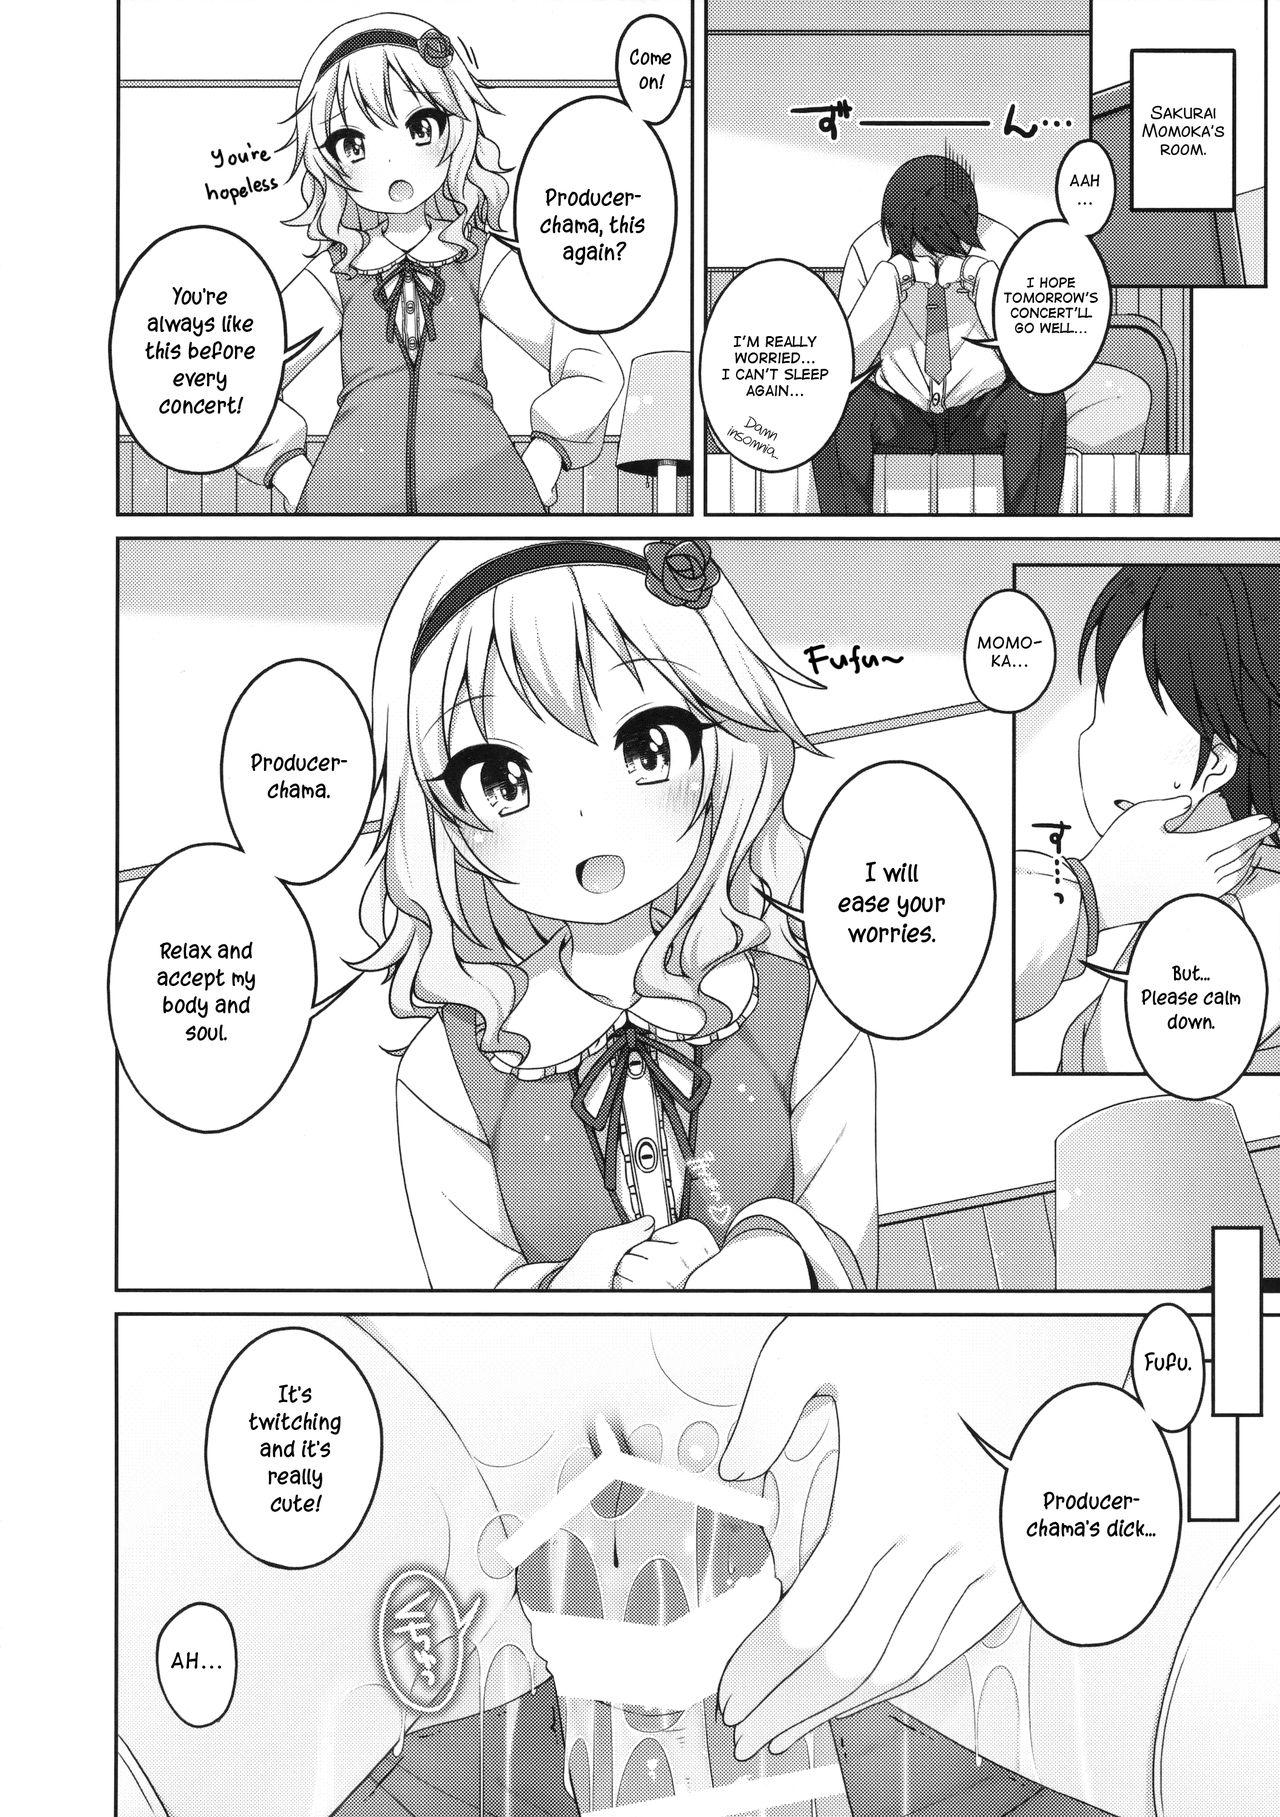 Panty Live no Mae no Hi wa | The day before the concert - The idolmaster Milk - Page 7